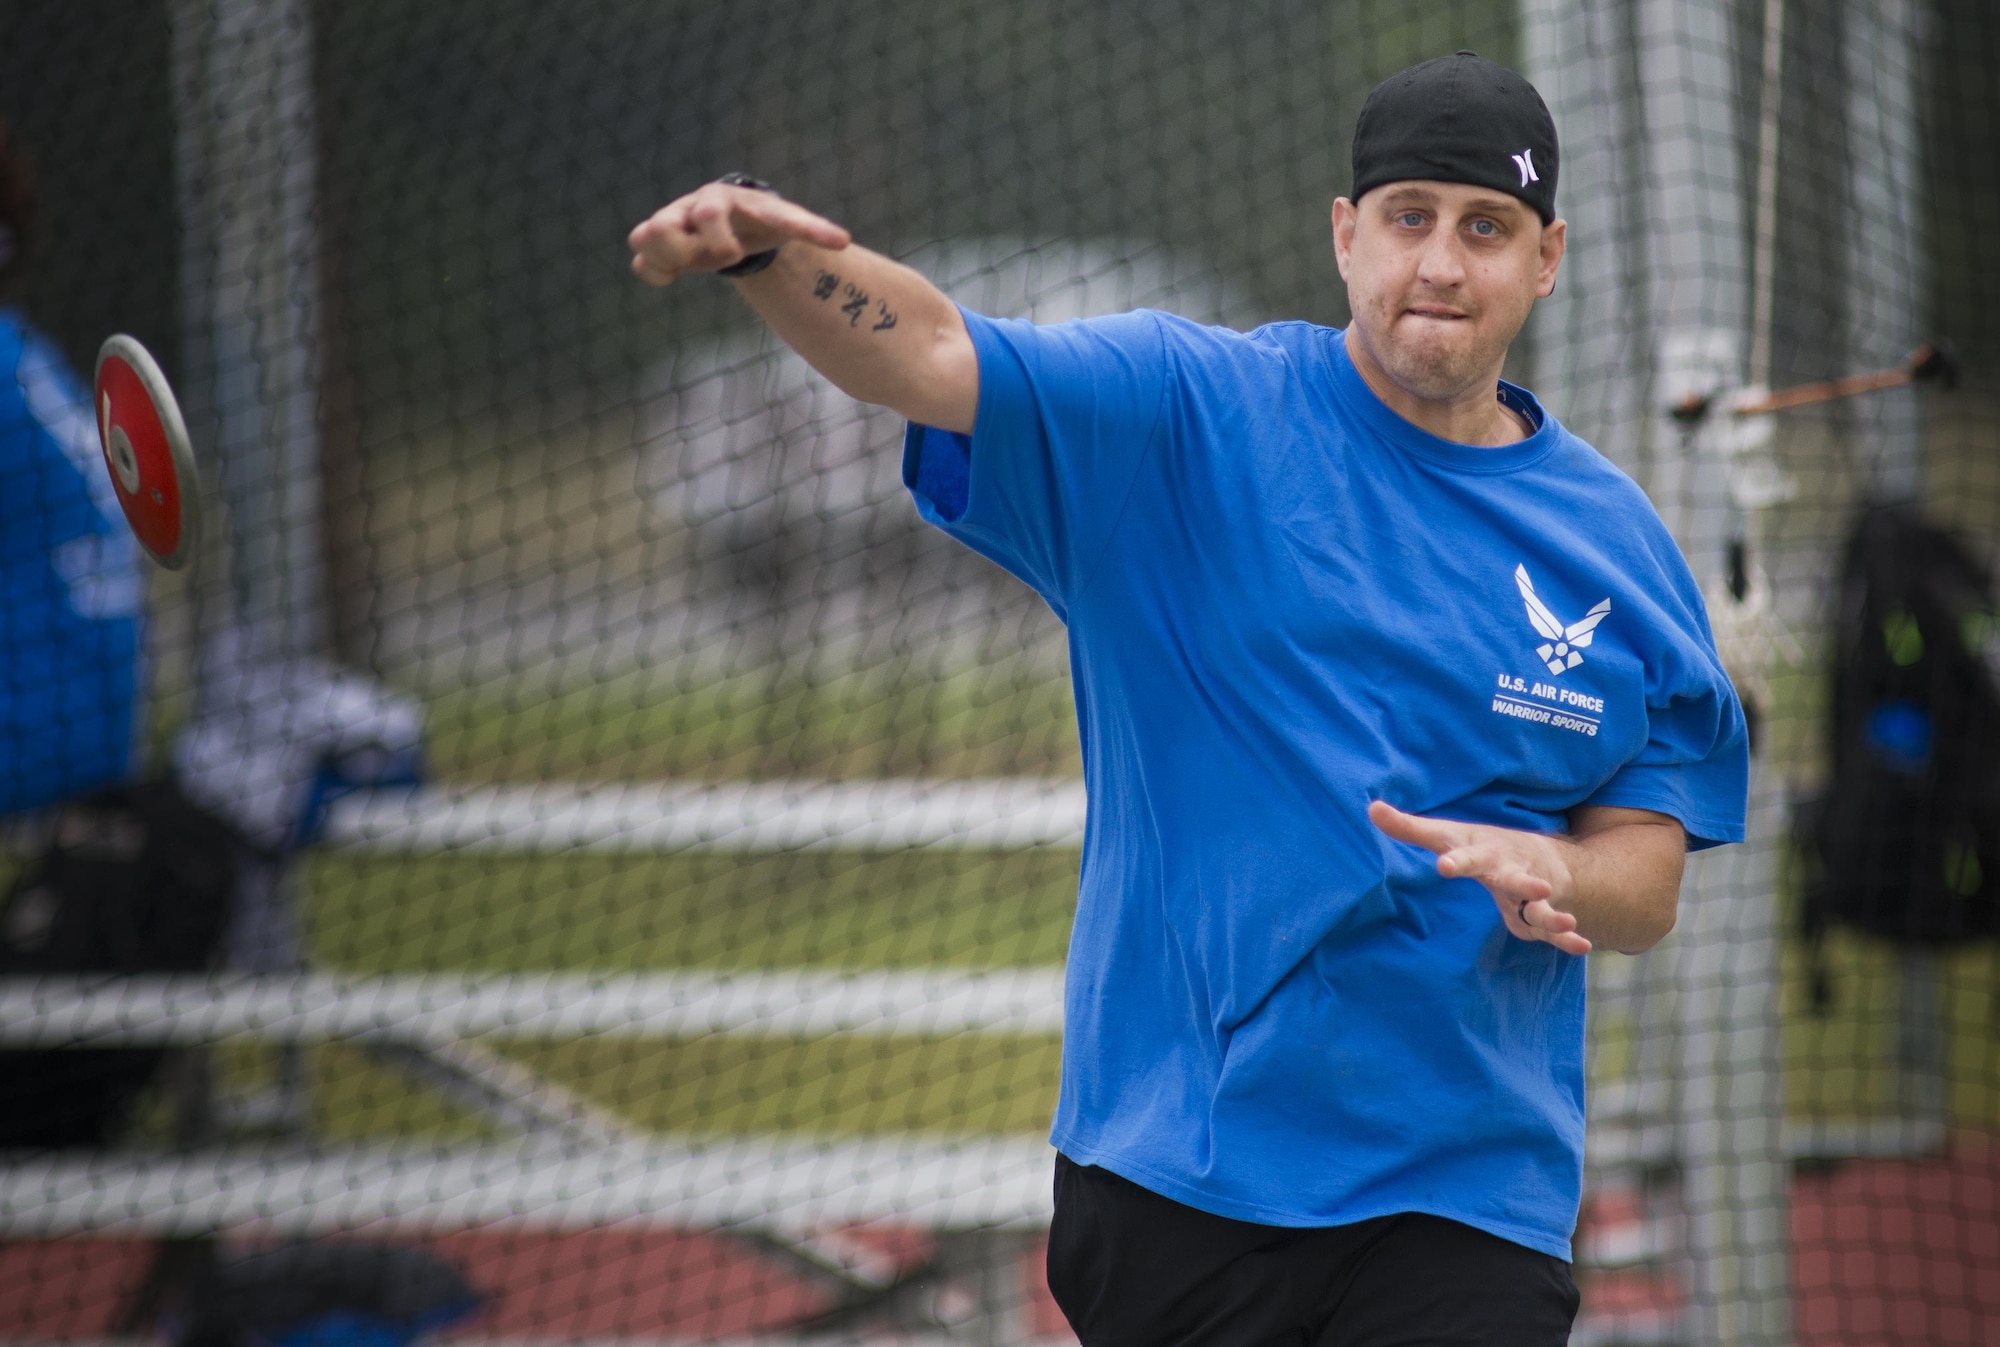 Senior Airman Chris Fugitt, a retired 96th Aircraft Maintenance Squadron Airman and an Air Force wounded warrior athlete, lets the discus fly at the track during the second day of an introductory adaptive sports and rehabilitation camp at Eglin Air Force Base, Fla., April 14, 2015. Two years after complications from a massive stroke forced Fugitt to retire from the Air Force, his warrior spirit enabled him to power past a number of debilitating setbacks and attend his first camp. (U.S. Air Force photo/Samuel King Jr.)